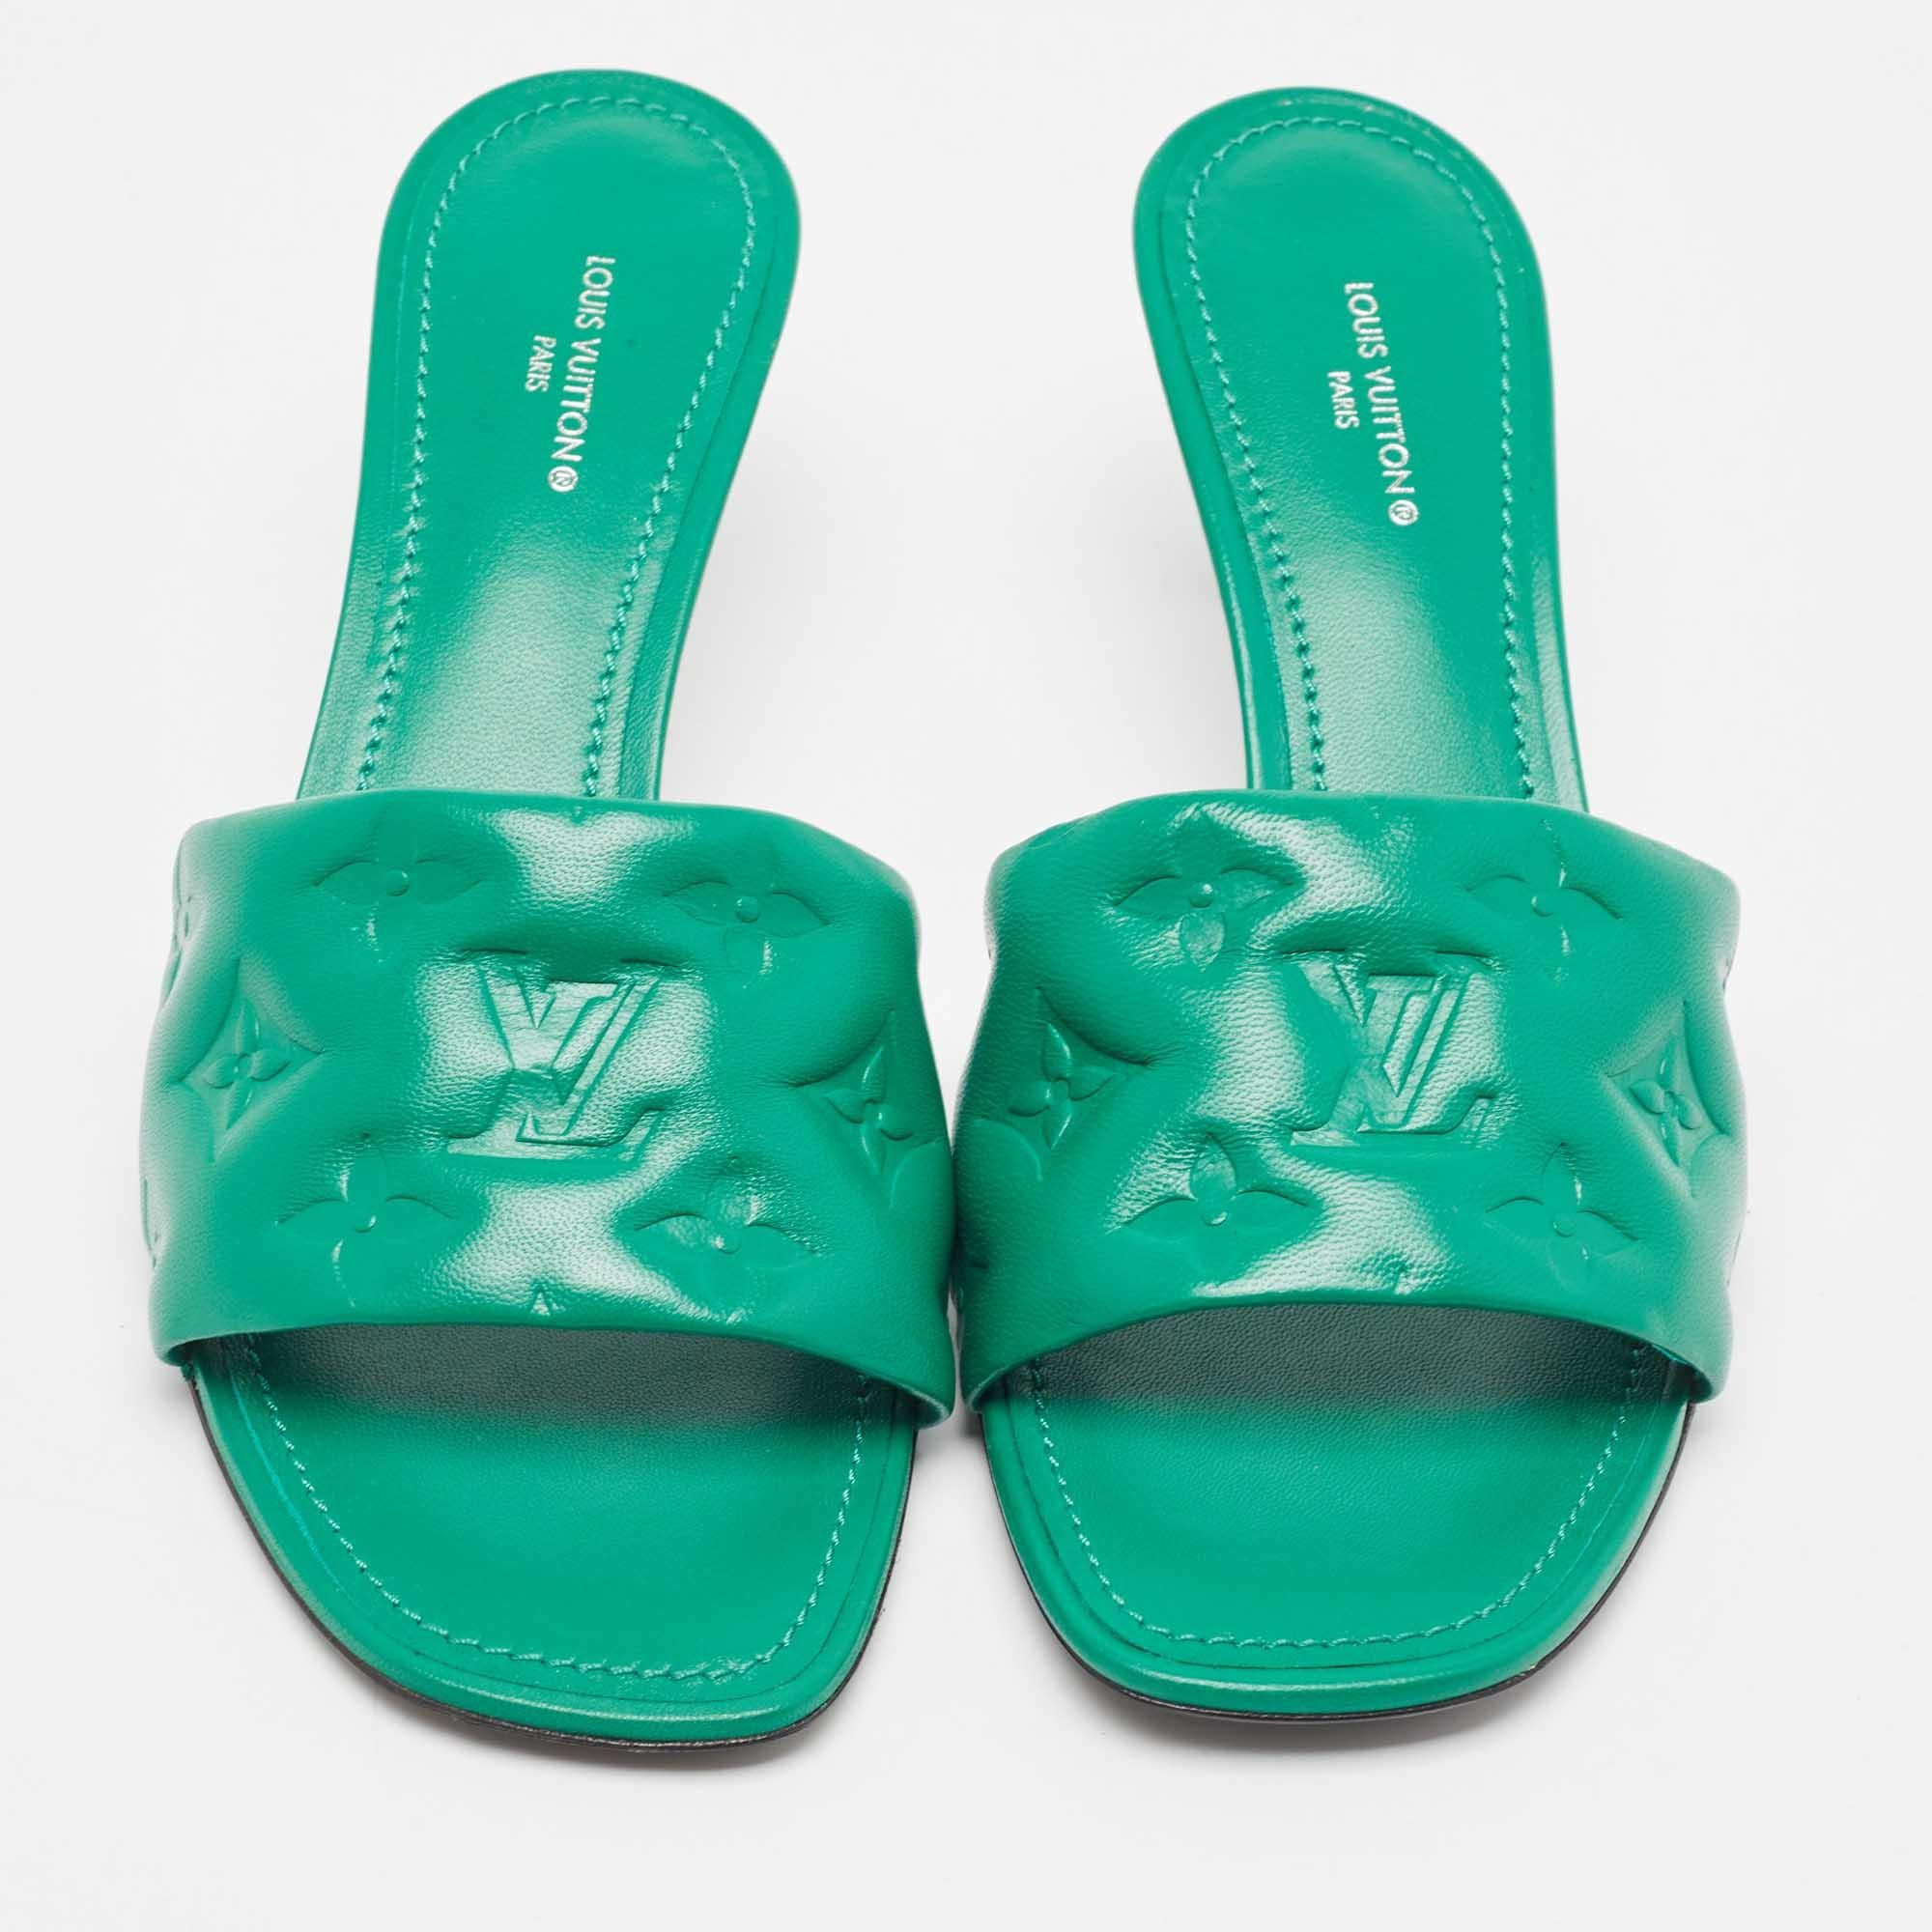 A perfect blend of luxury, style, and comfort, these designer slides are made using quality materials and frame your feet in the most practical way. They can be paired with a host of outfits from your wardrobe.

Includes: Original Dustbag, Original